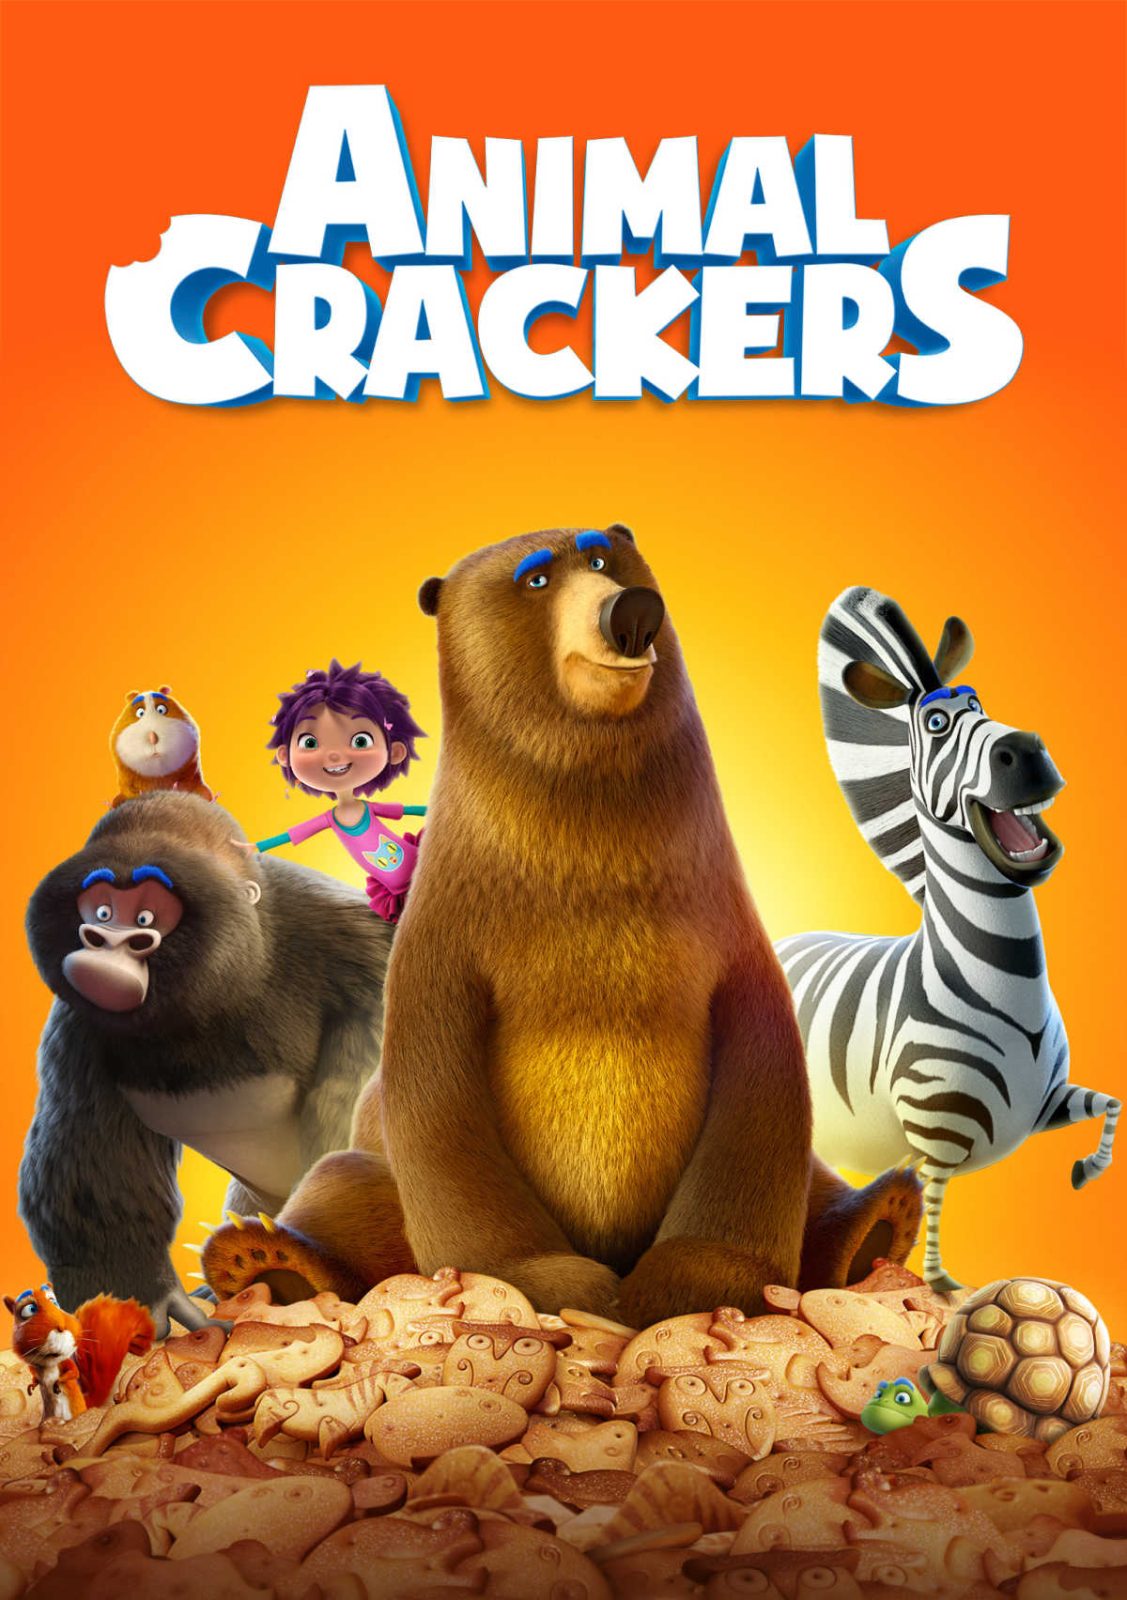 The highly anticipated animated film Animal Crackers is now available on digital! This magical family adventure follows the story of Owen, a down-on-his-luck circus owner who inherits a box of magical animal crackers.